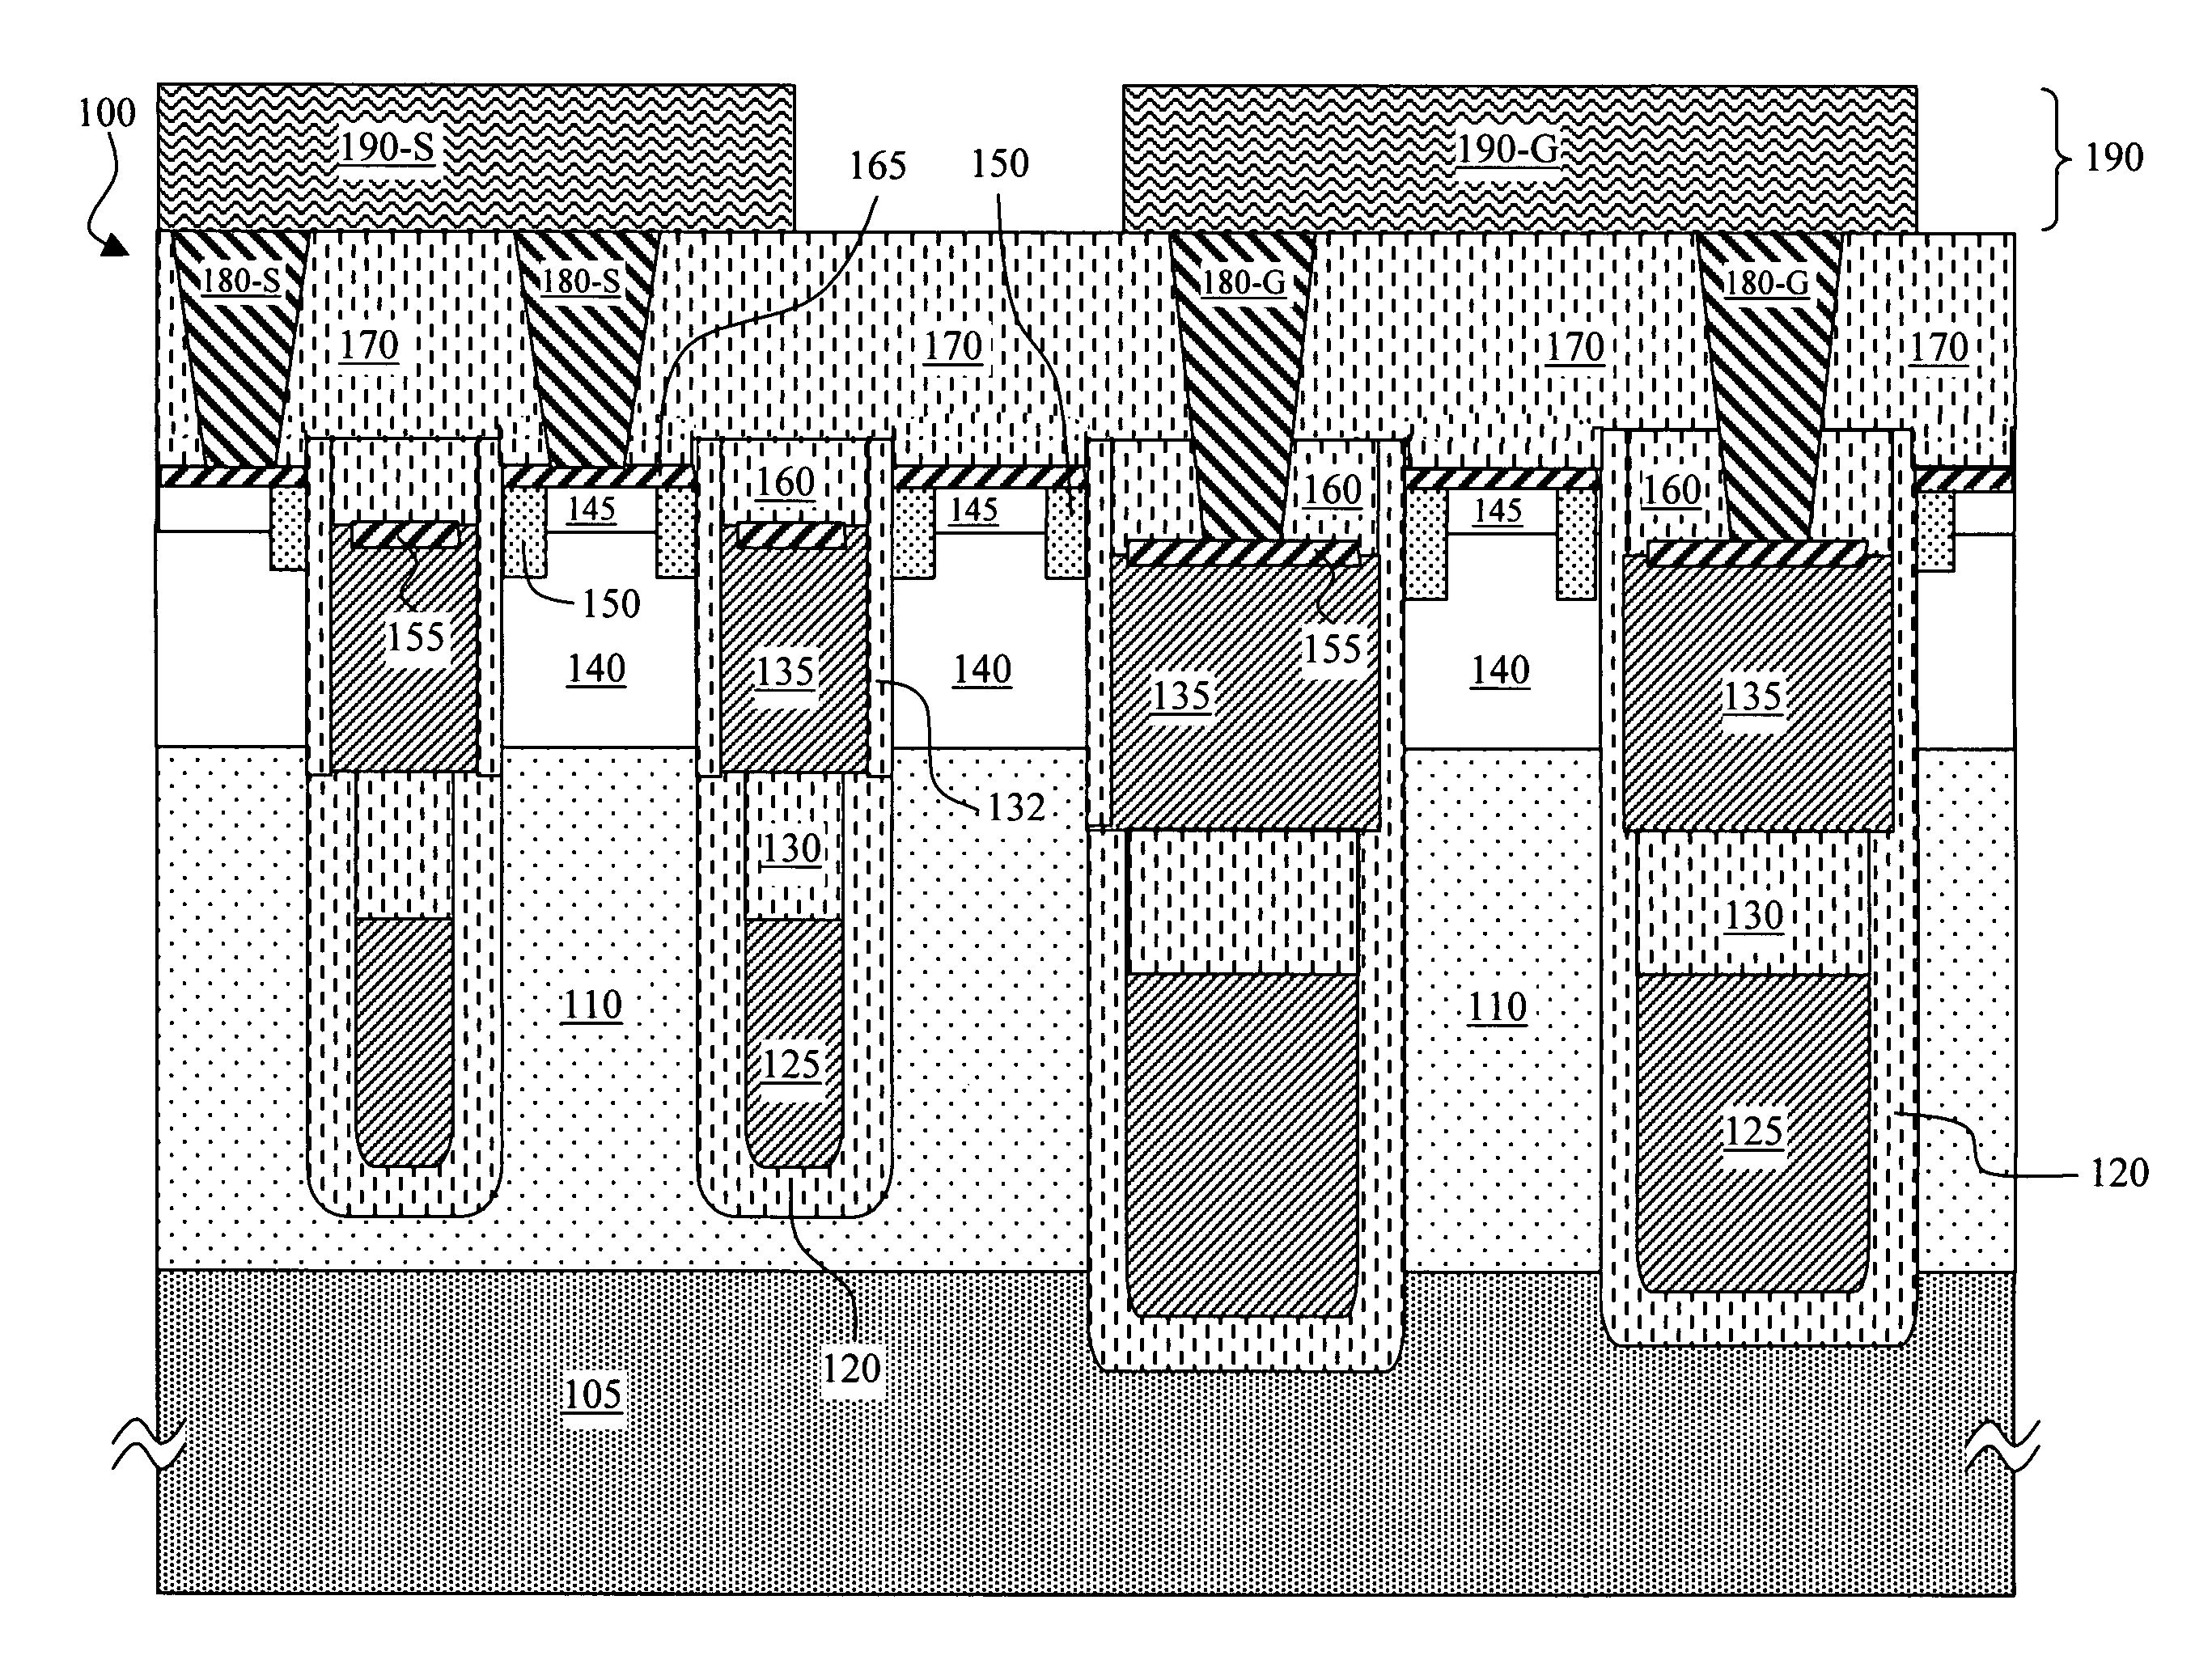 Semiconductor power devices manufactured with self-aligned processes and more reliable electrical contacts